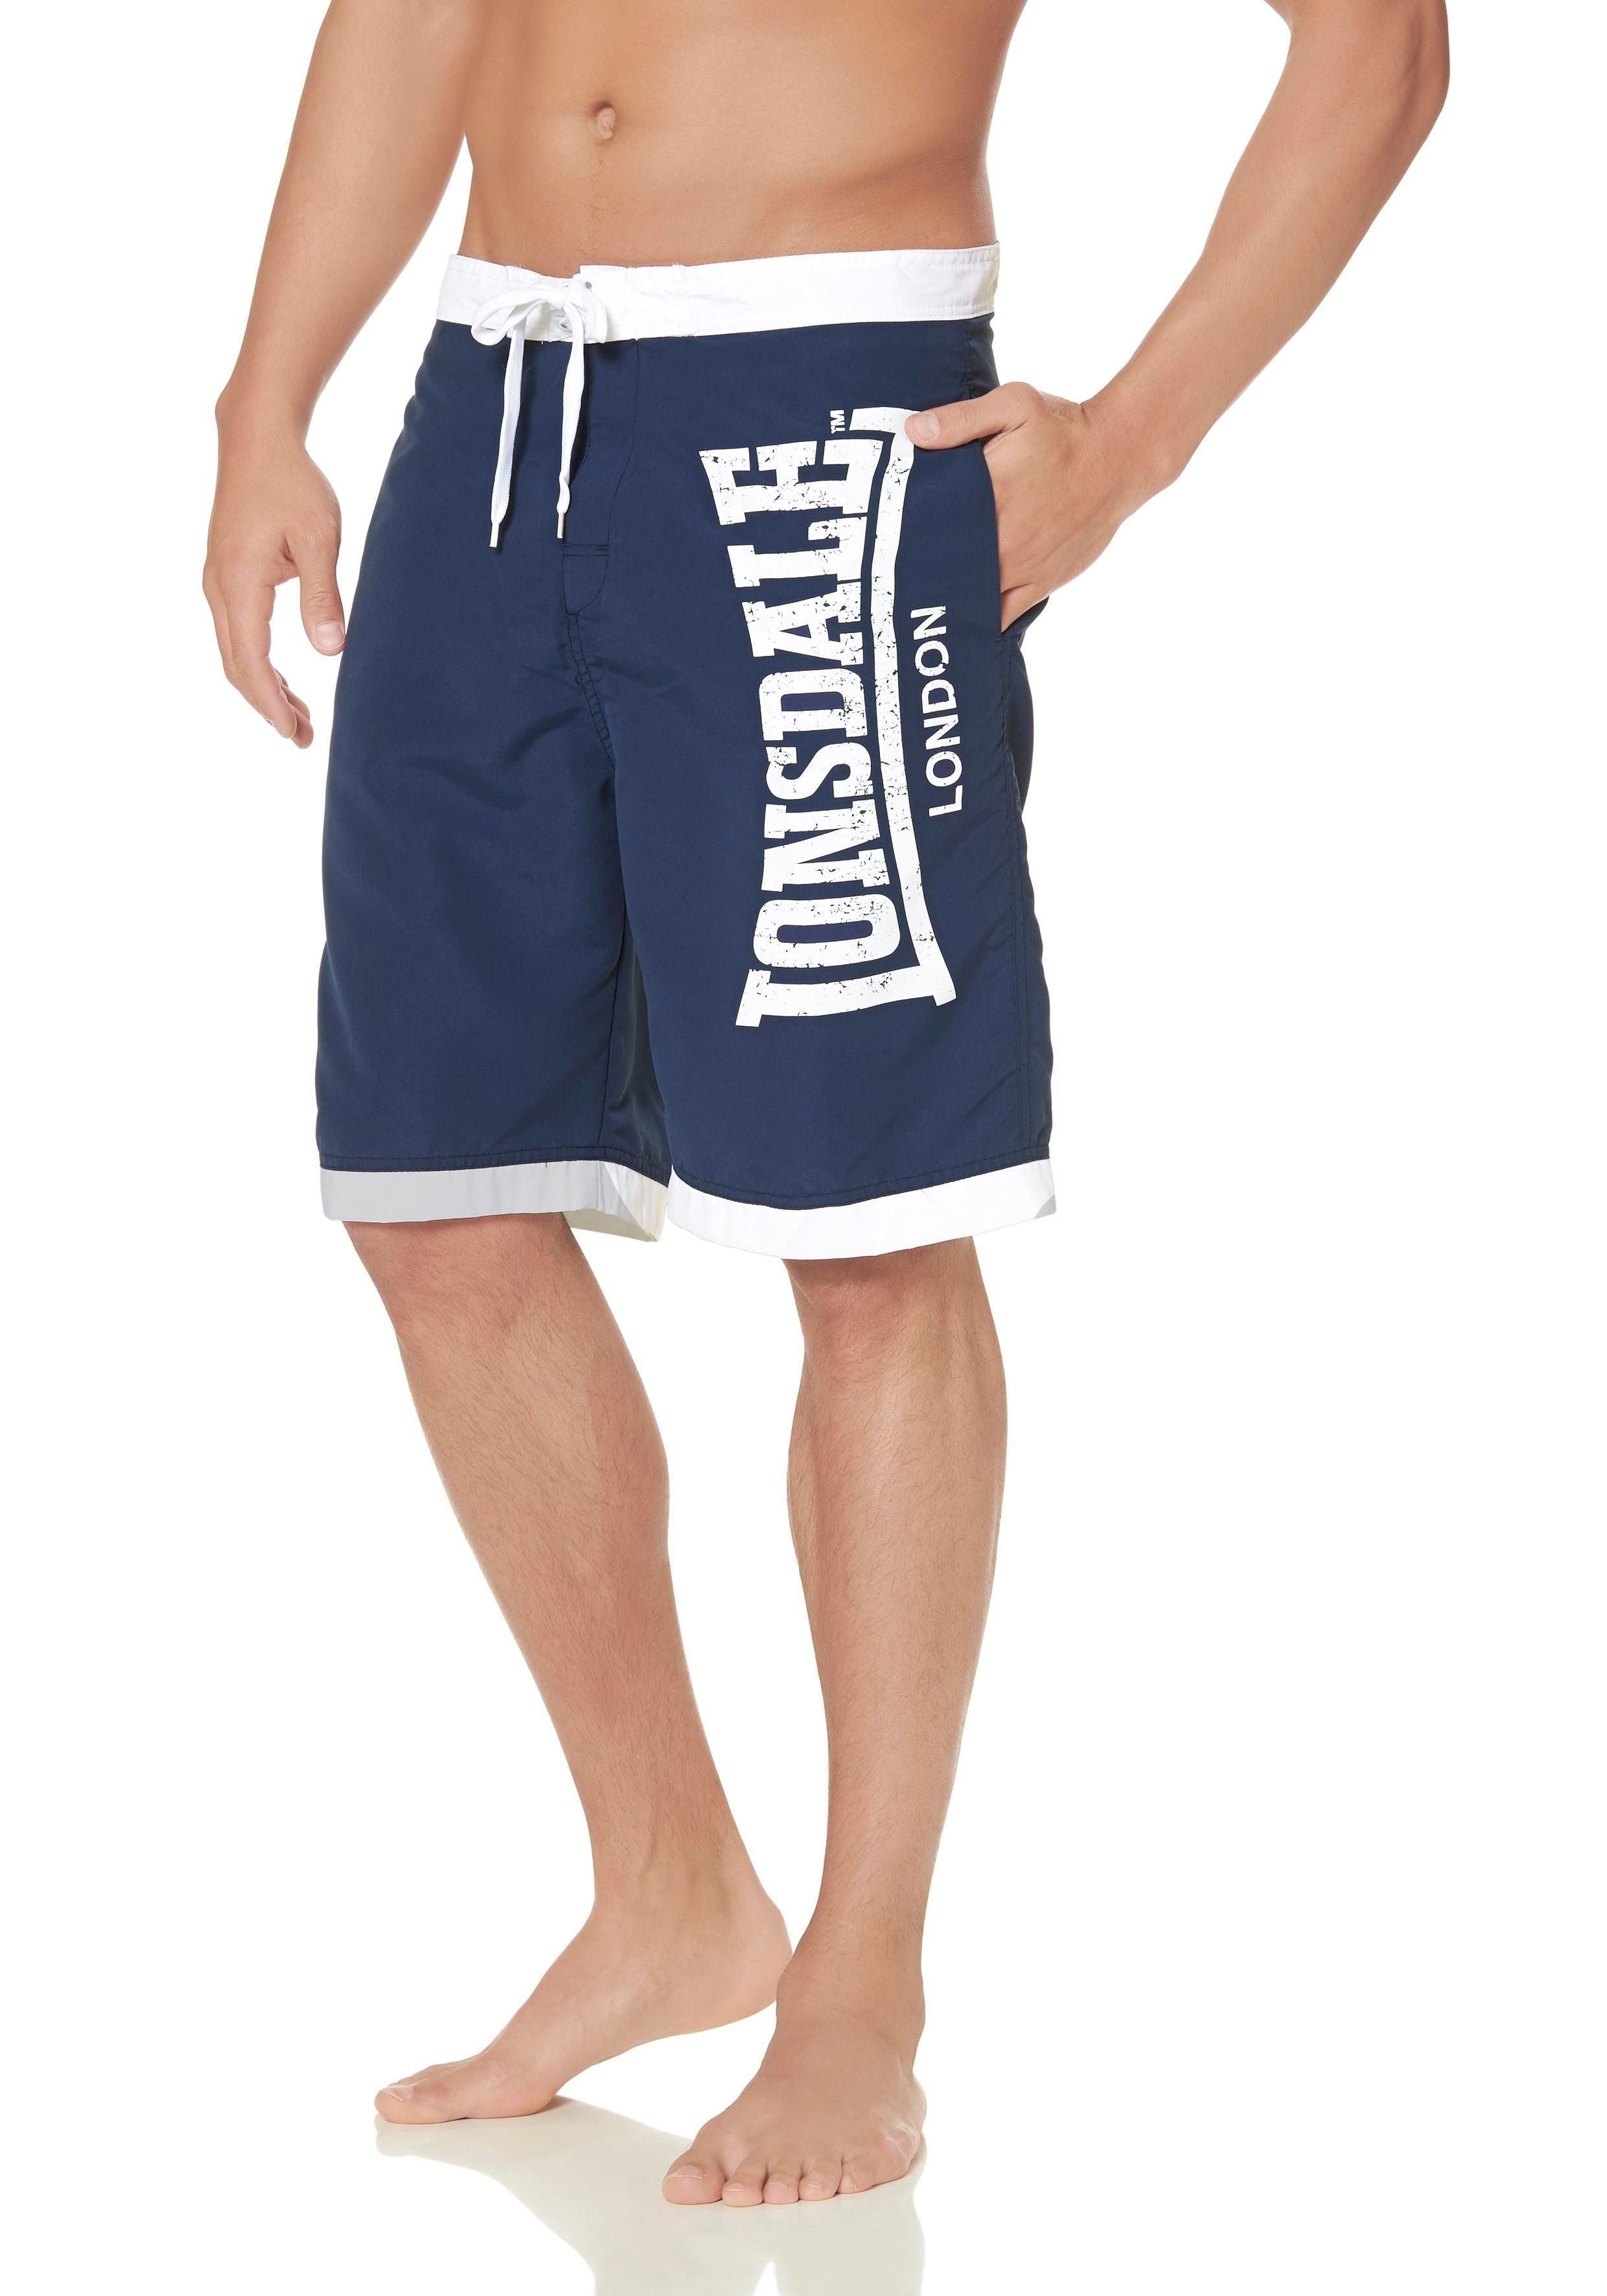 Lonsdale Boardshorts Beach Short CLENNELL navy/white